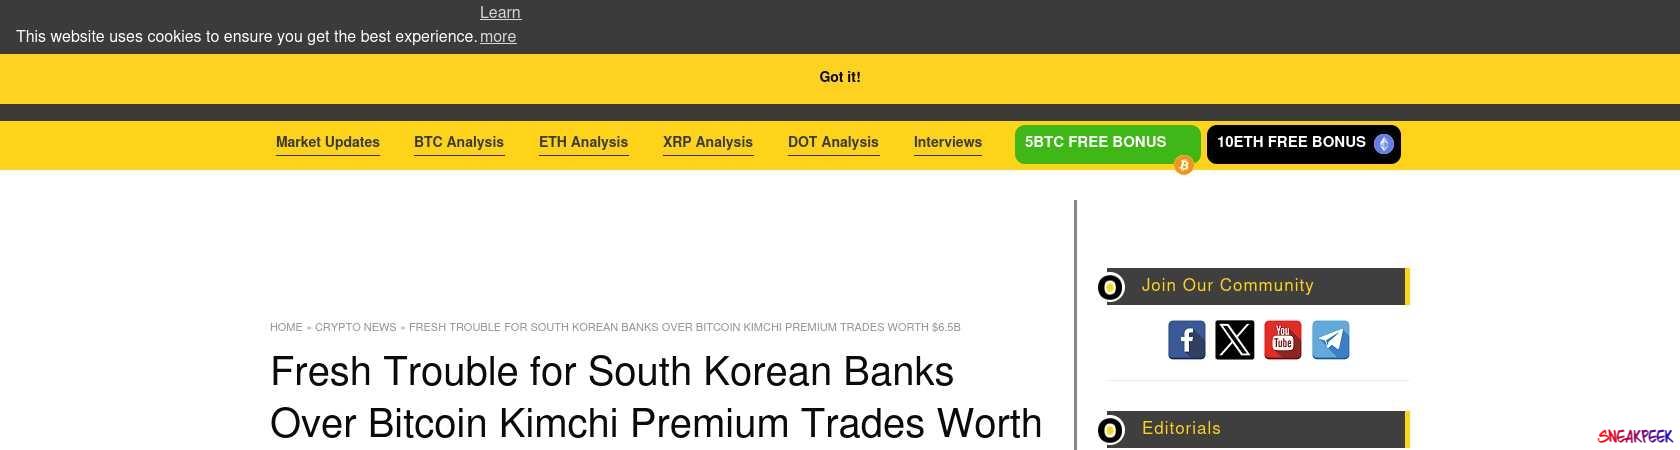 Read the full Article:  ⭲ Fresh Trouble for South Korean Banks Over Bitcoin Kimchi Premium Trades Worth $6.5B